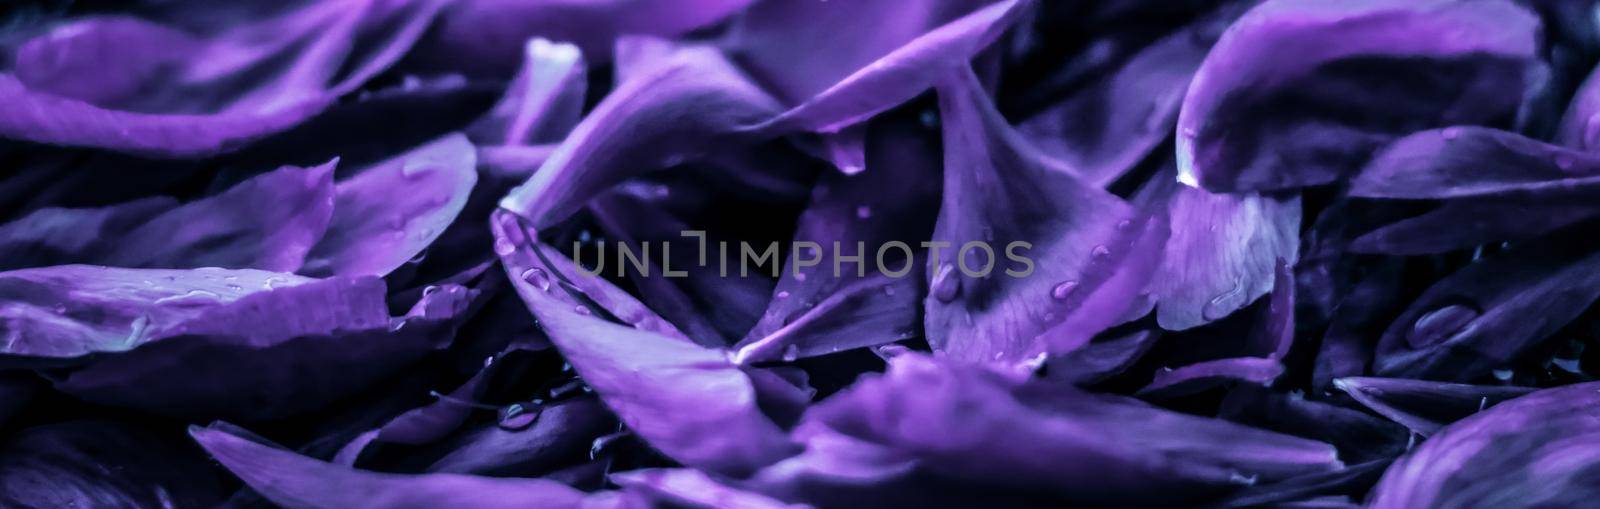 Abstract floral holiday art background, purple blooming flower petals in a dream garden and beauty in nature for luxury spa brand and wedding invitation design by Anneleven